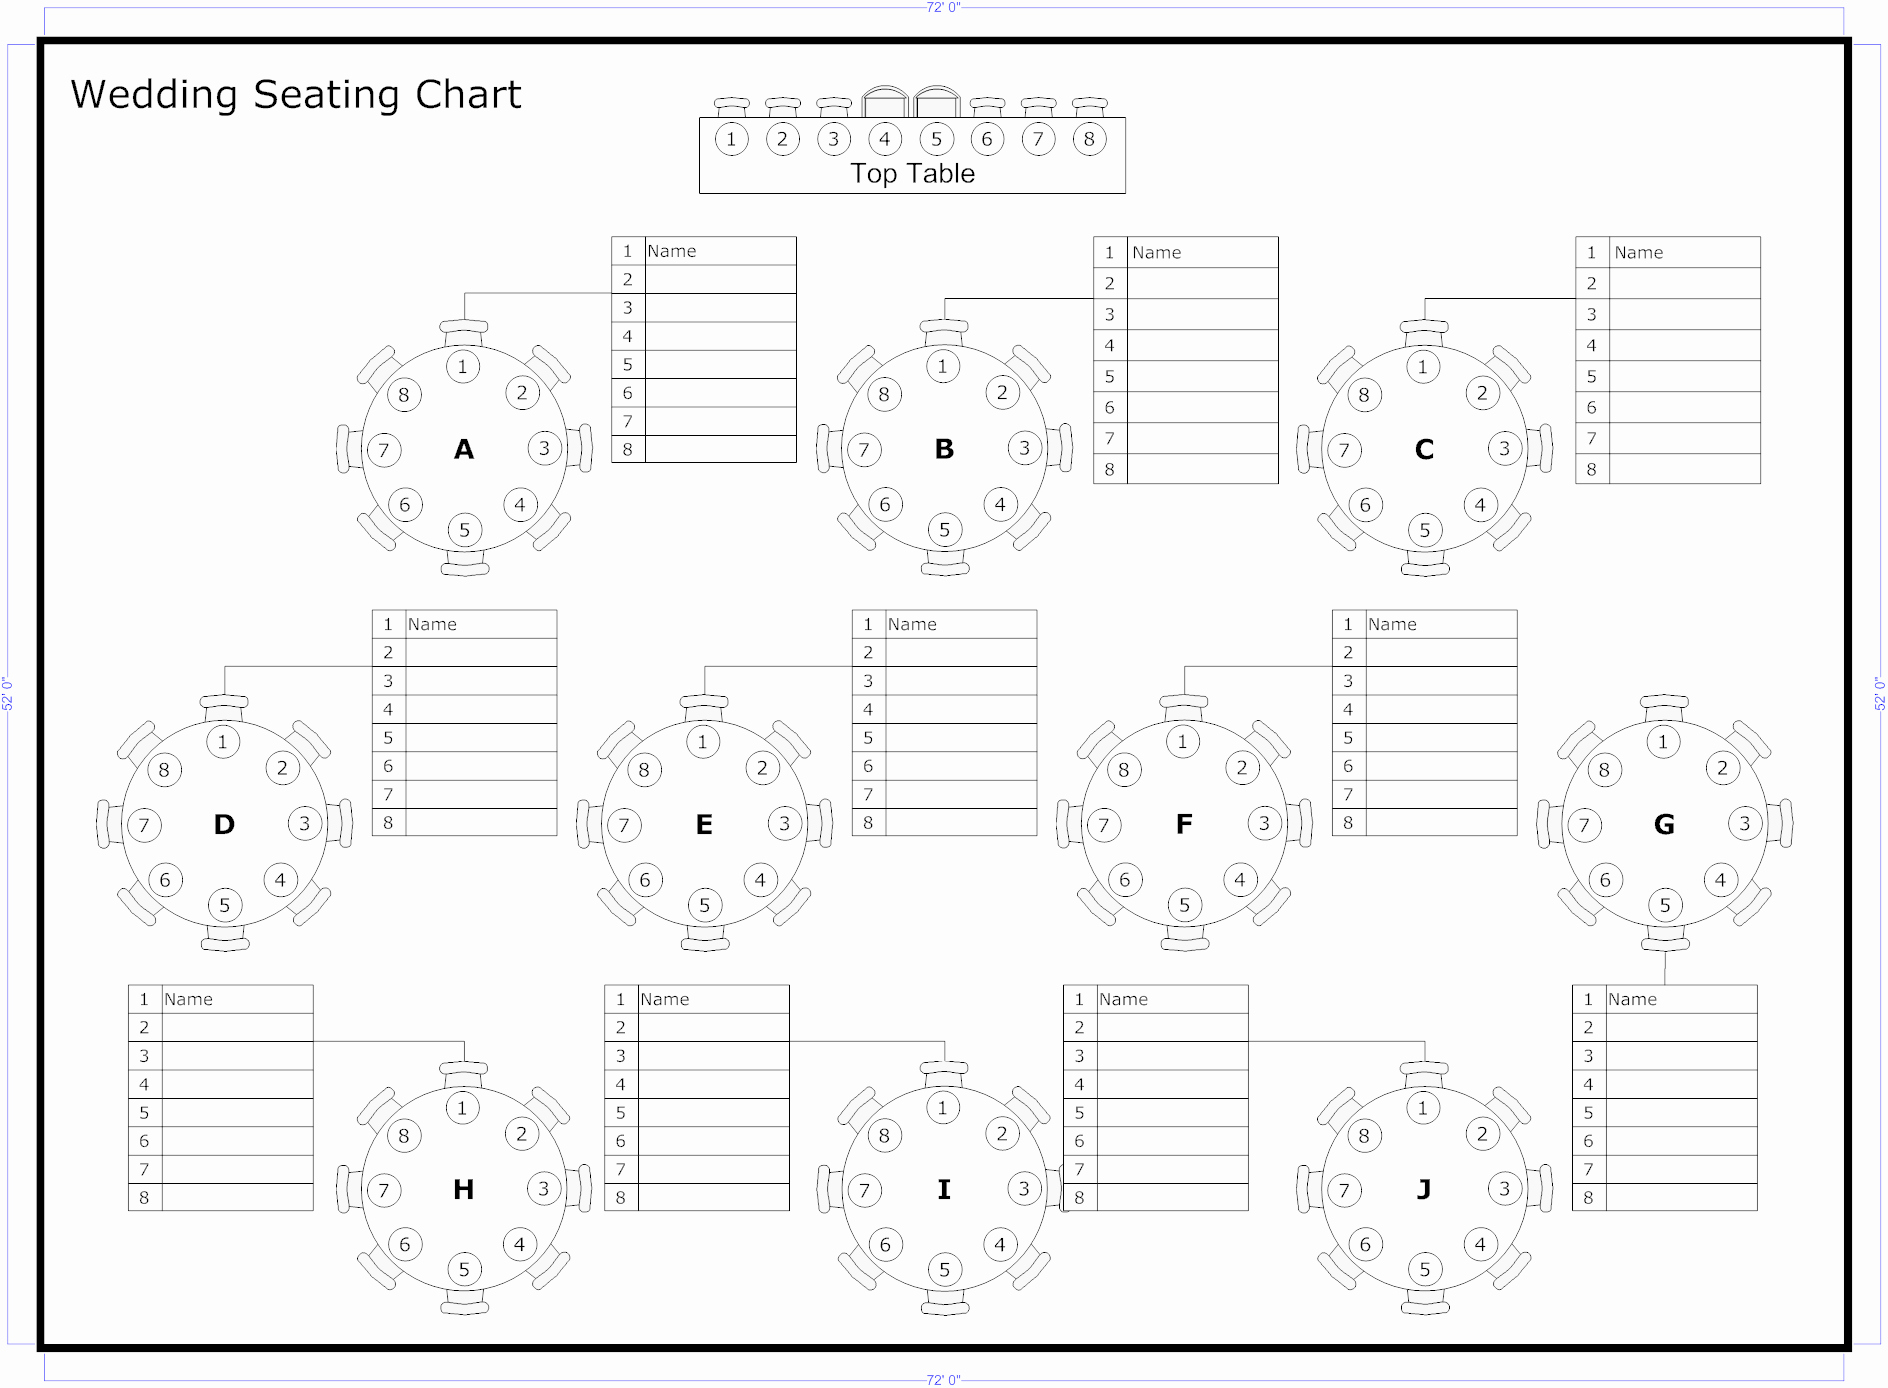 Table Seating Chart Template Awesome Seating Chart Make A Seating Chart Seating Chart Templates